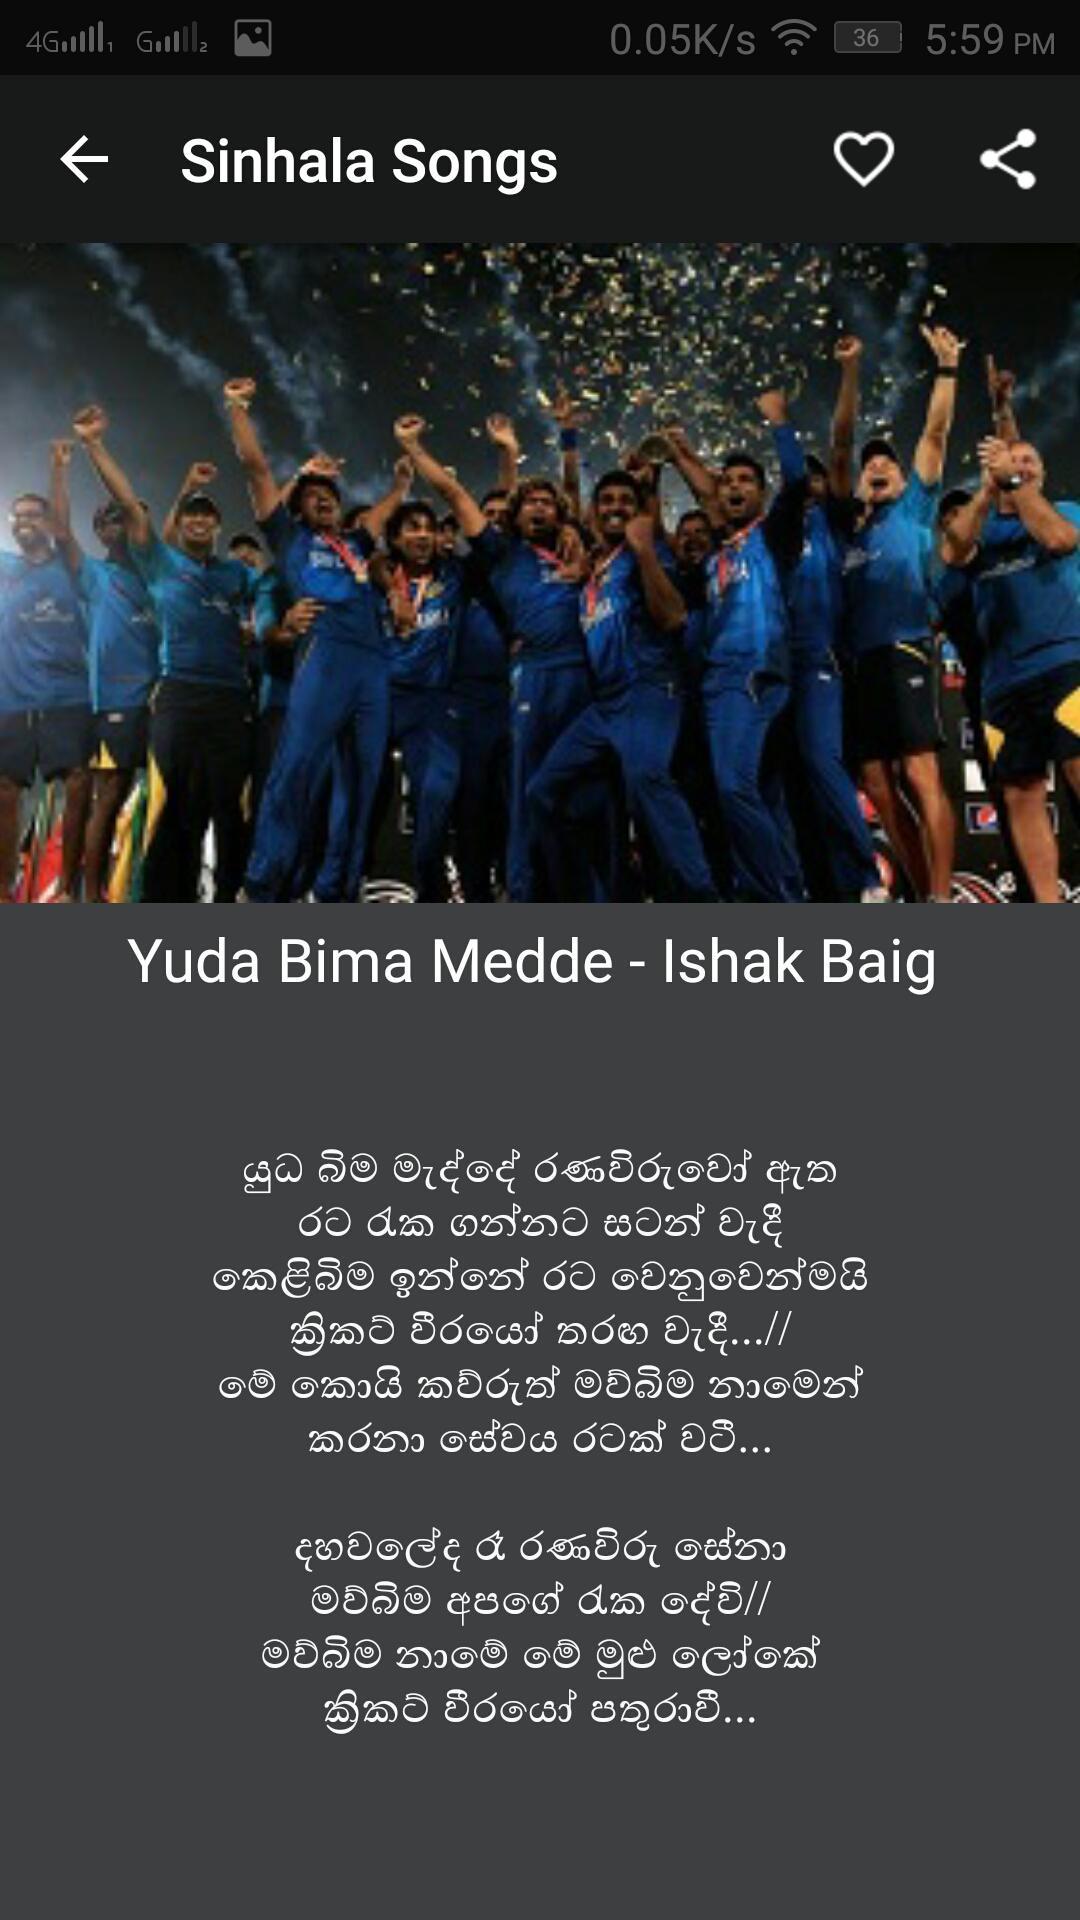 Sinhala Songs for Android - APK Download